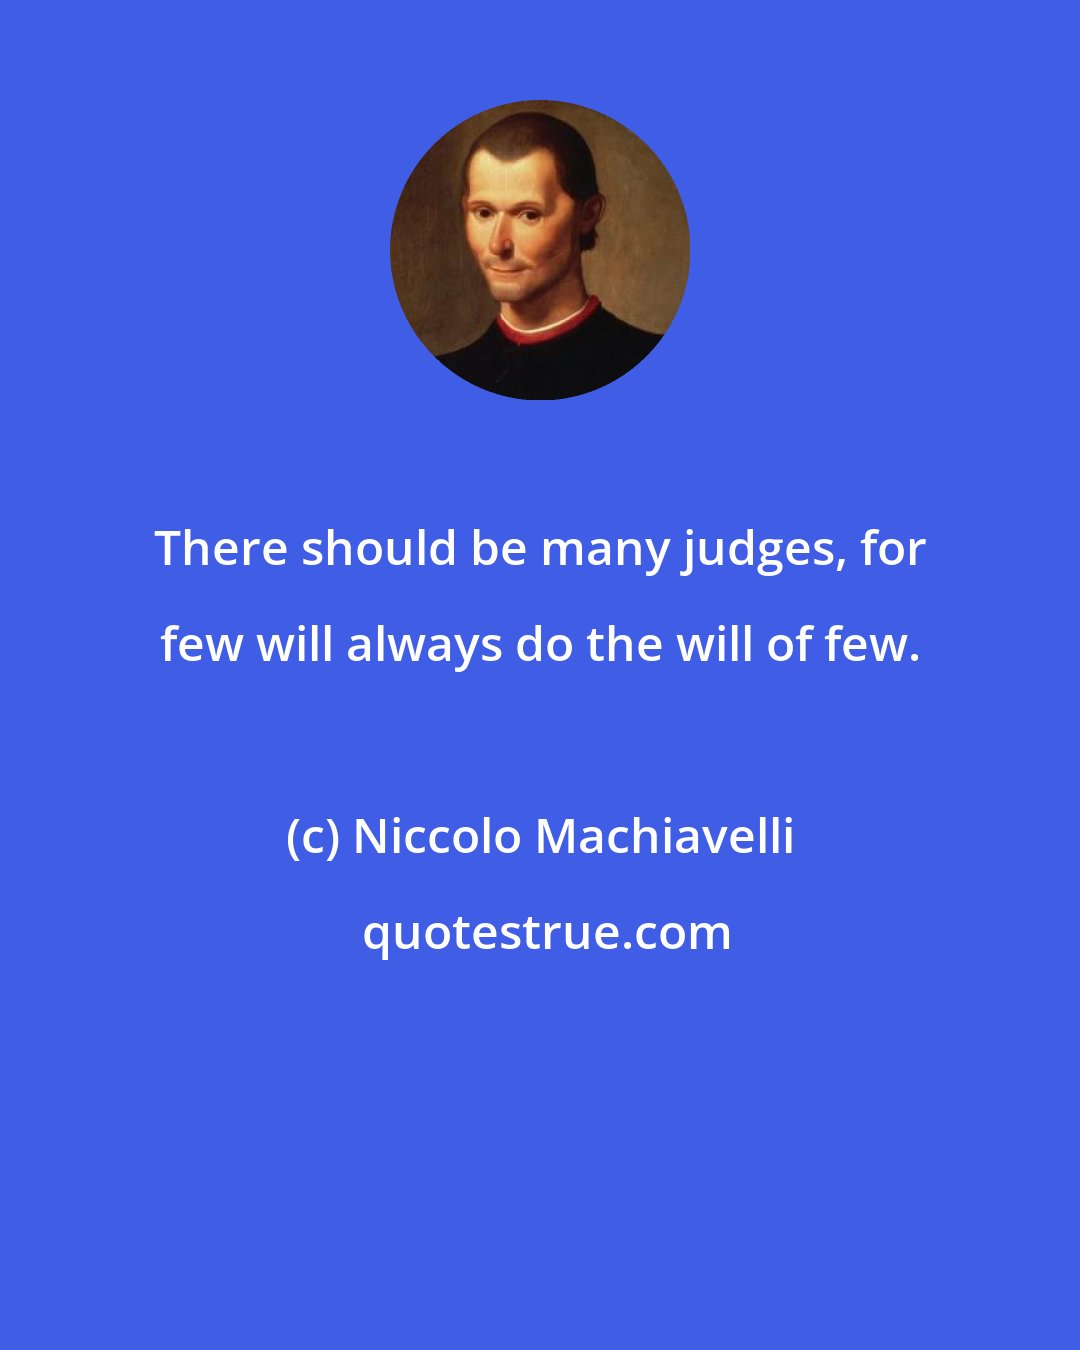 Niccolo Machiavelli: There should be many judges, for few will always do the will of few.